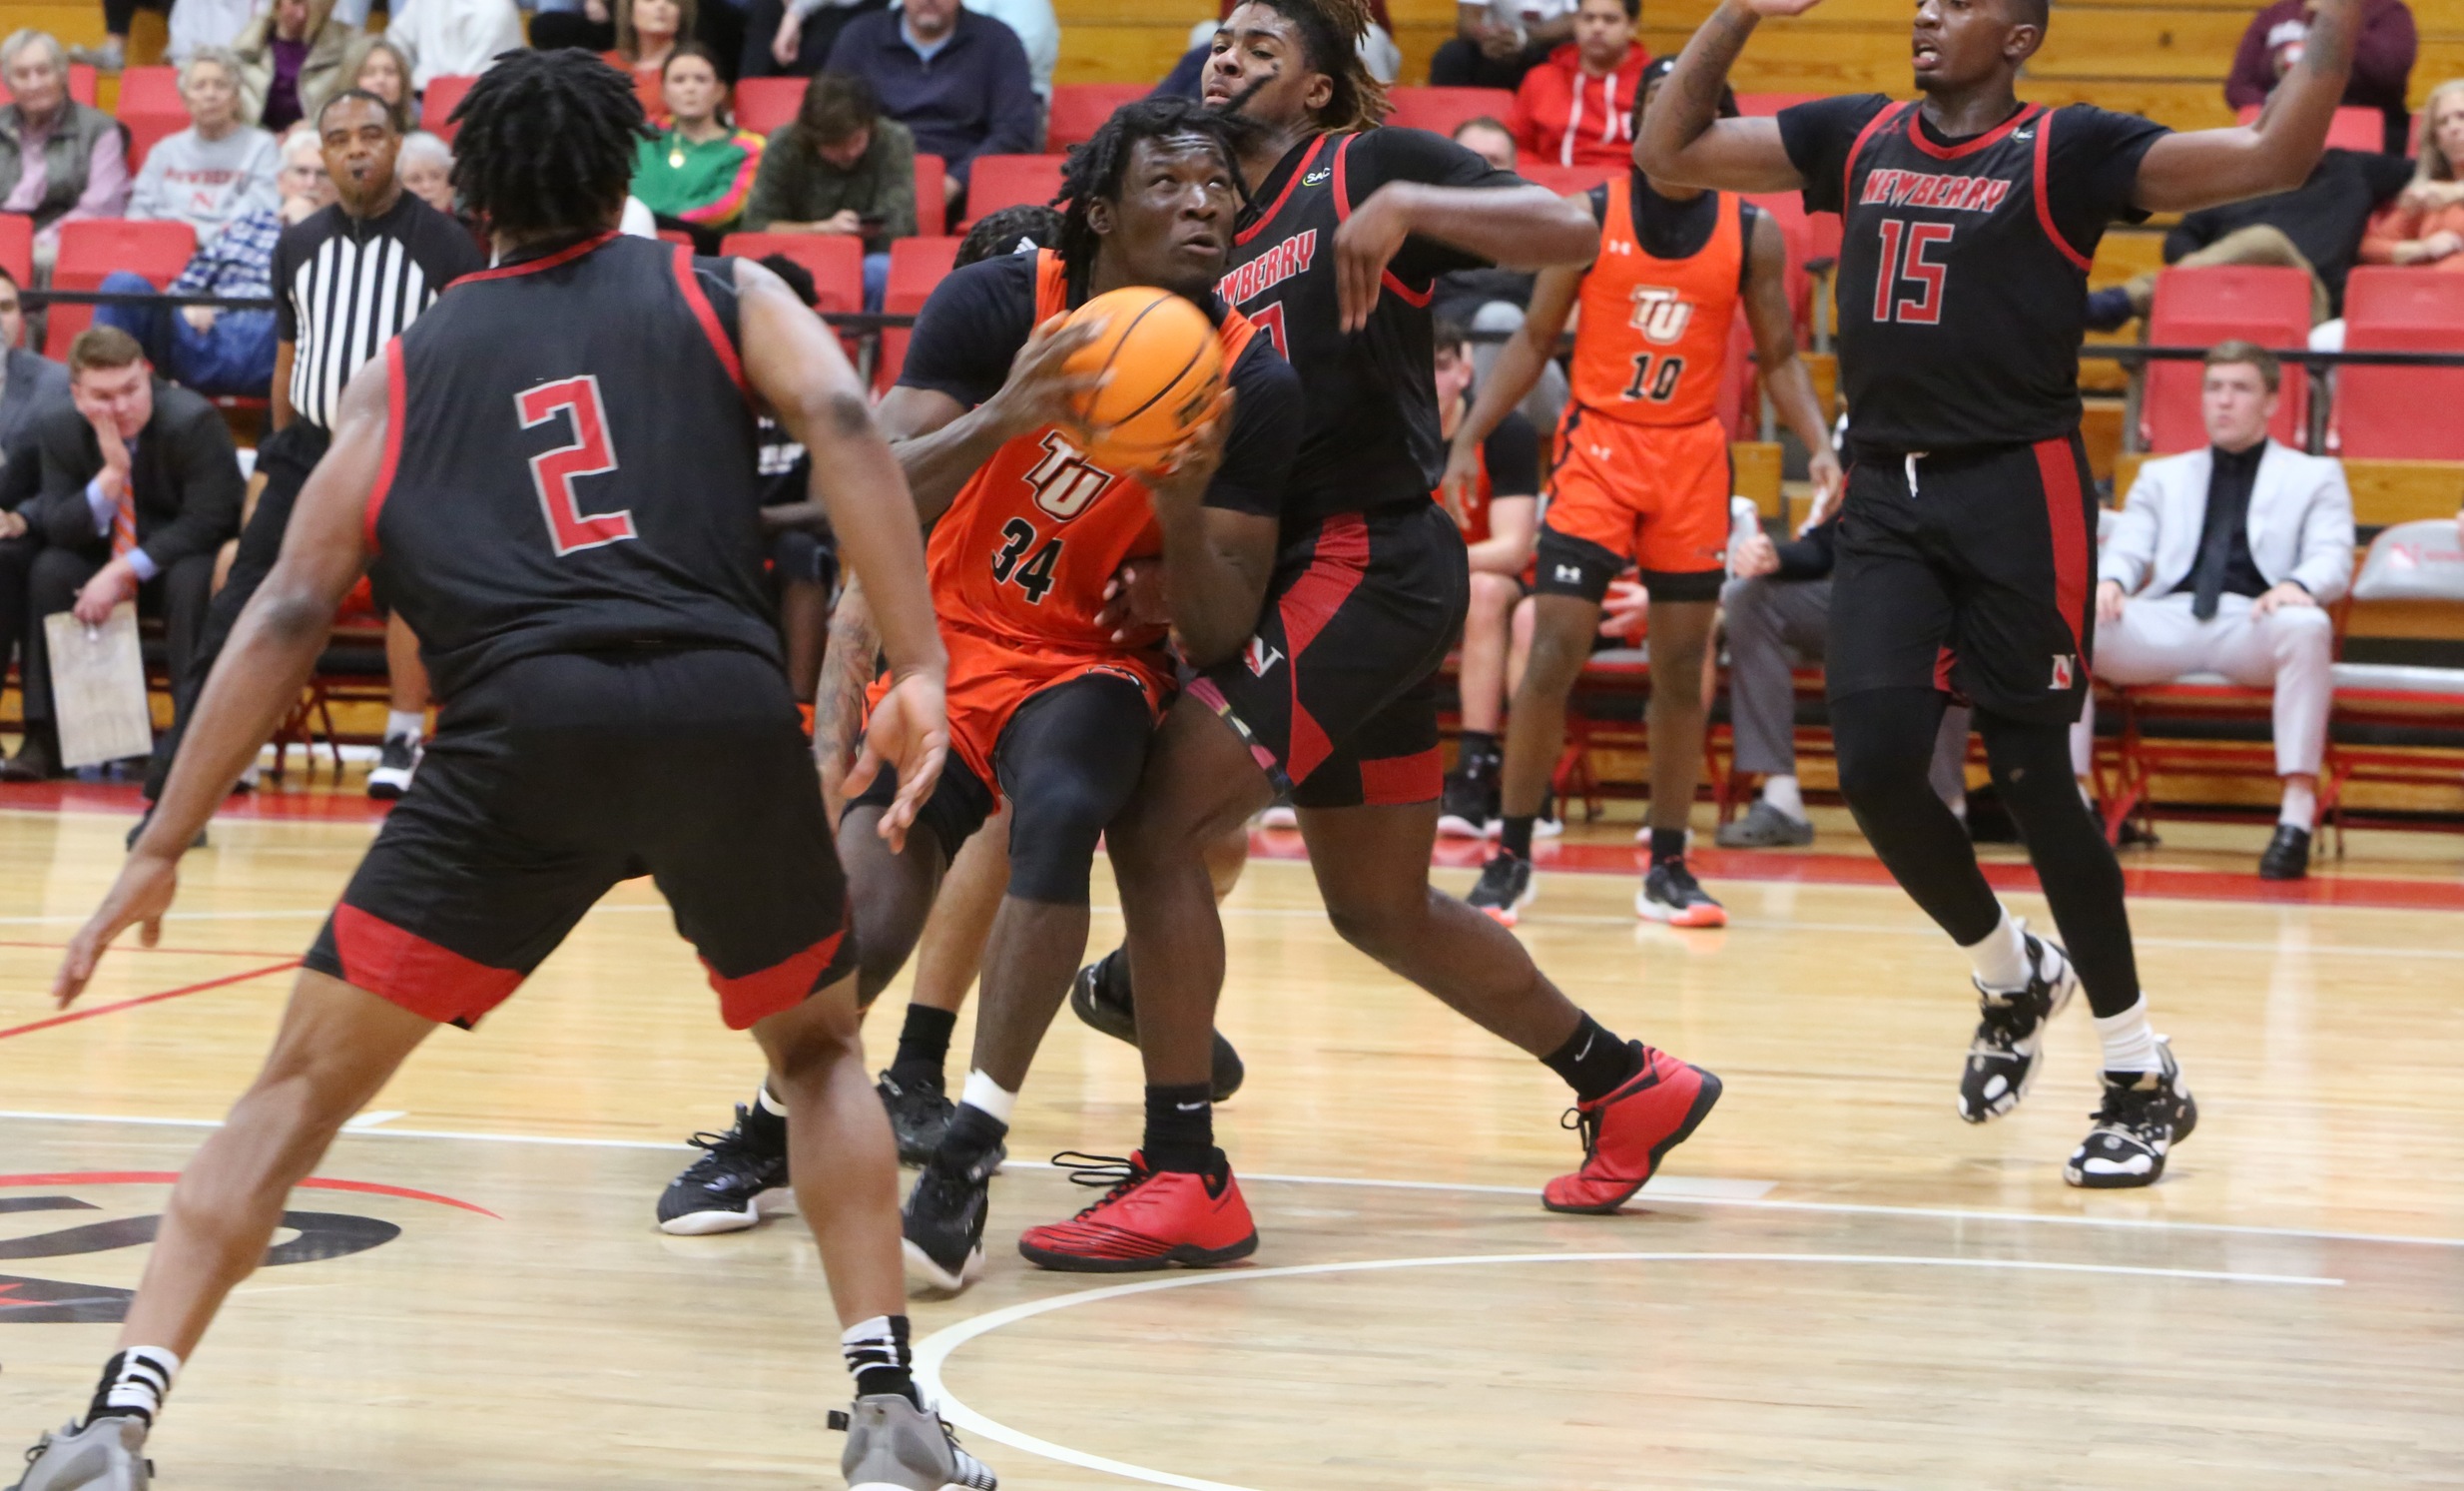 Akeem Odusipe recorded a game-high 13 rebounds in Tusculum's loss at Newberry